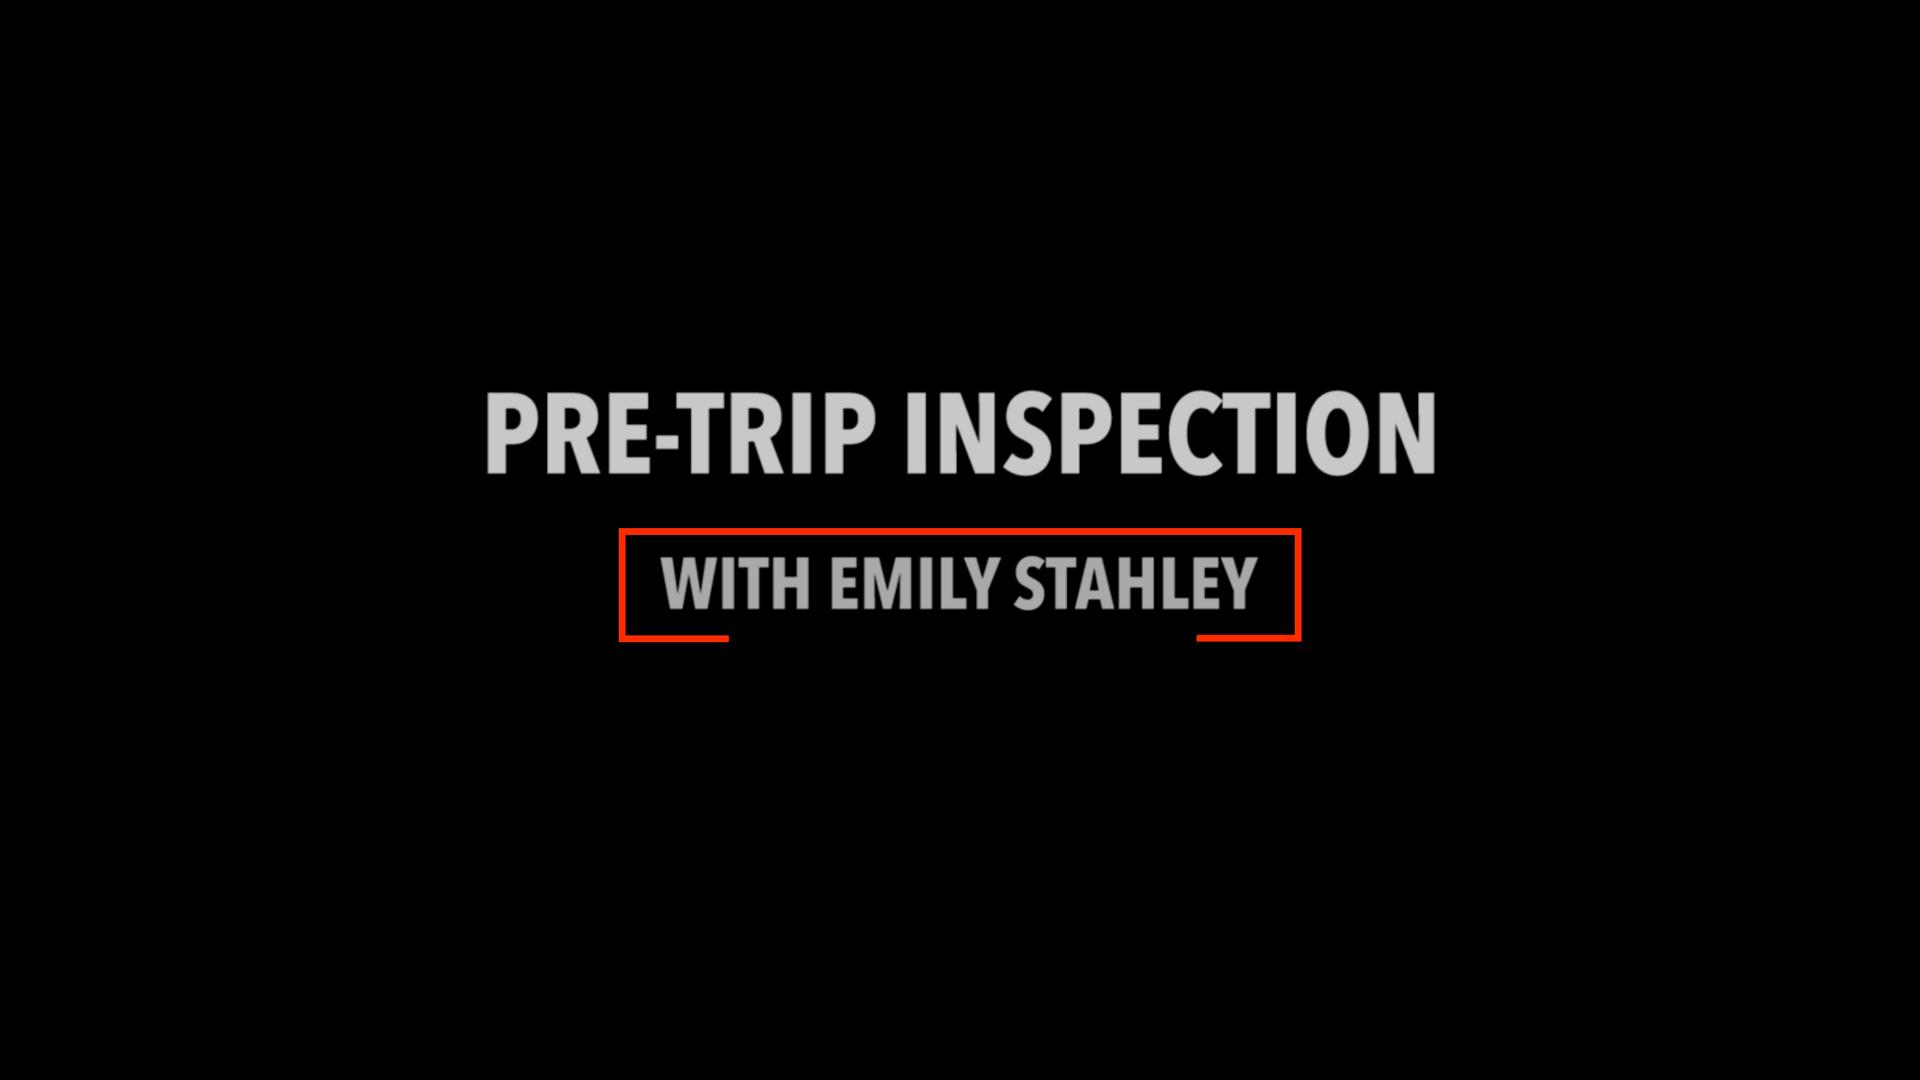 Pre-Trip Inspection with Emily Stahley